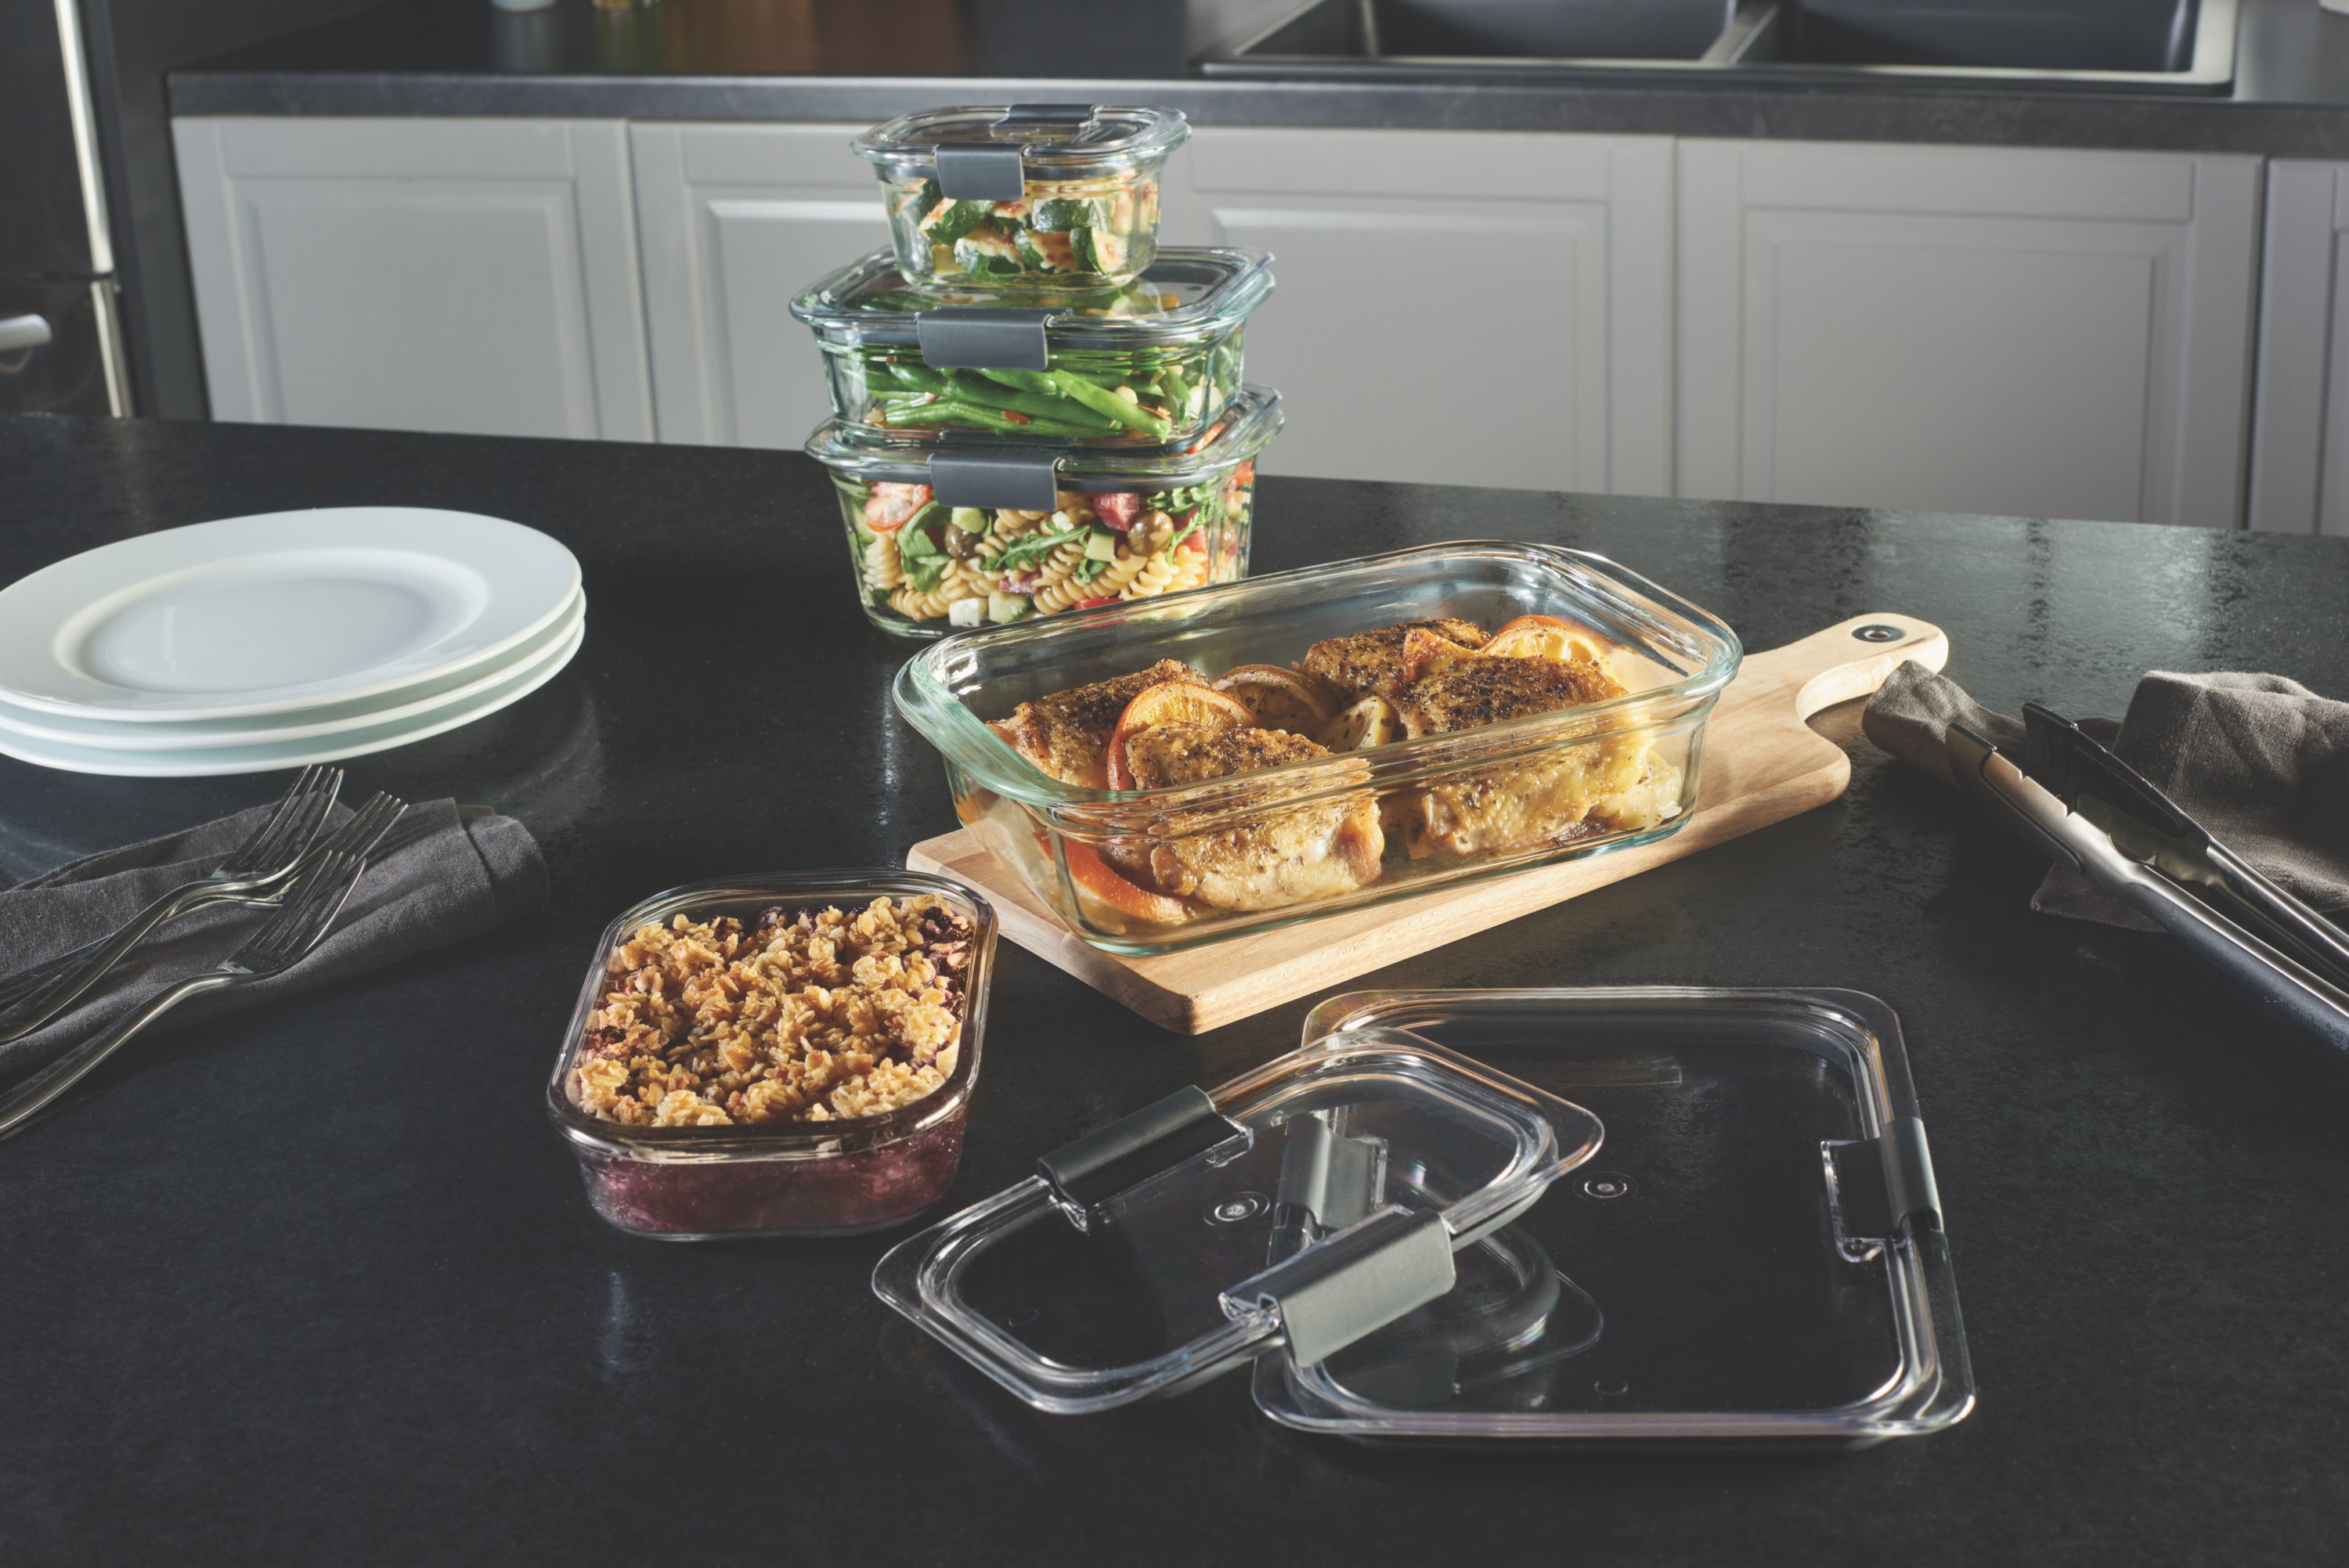 Rubbermaid Brilliance 4.7-Cup Food Storage Container